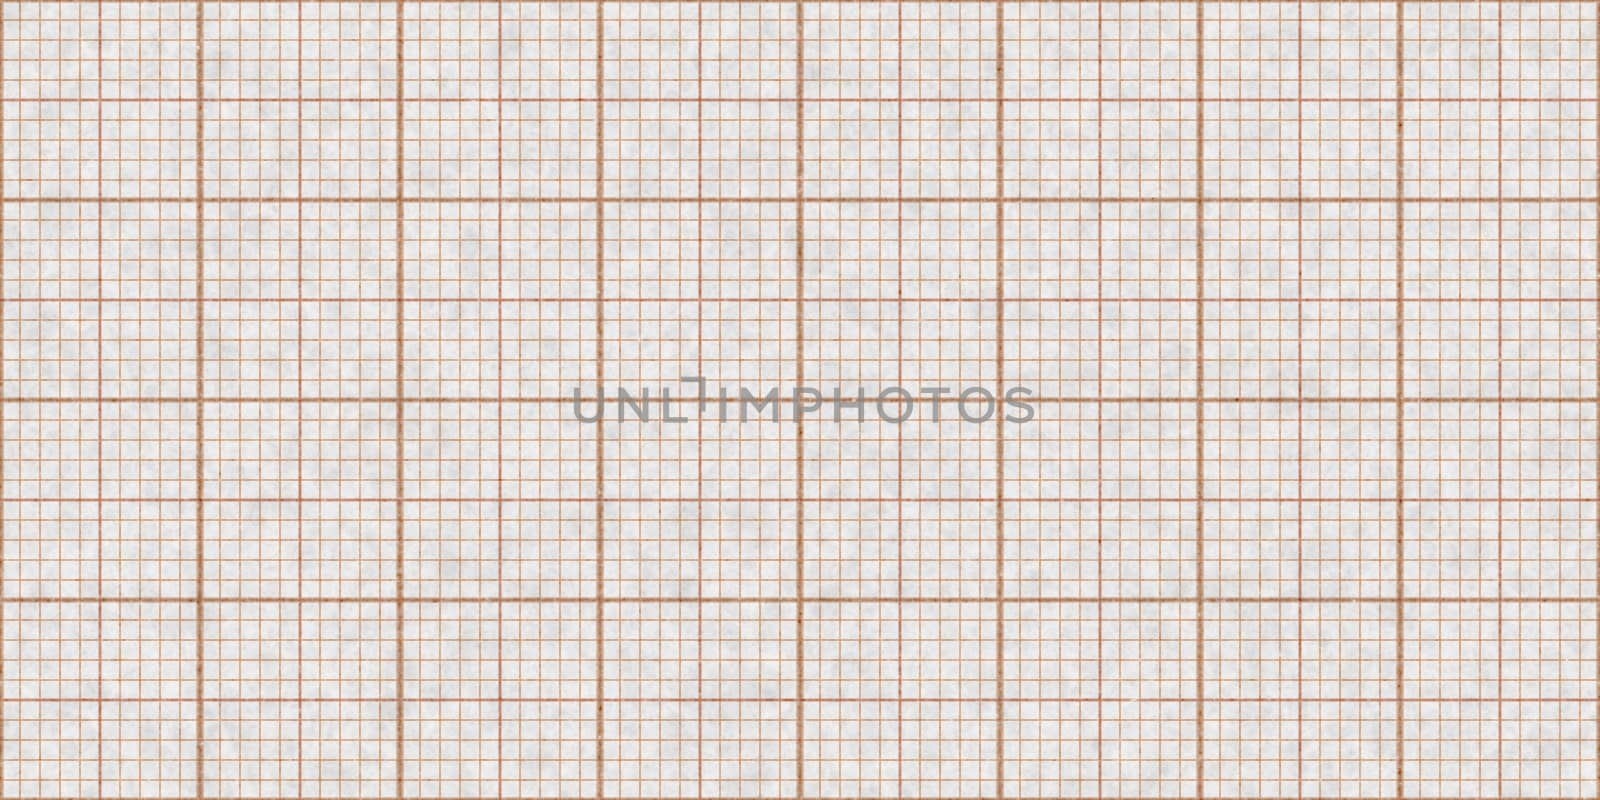 Orange Seamless Millimeter Paper Background. Tiling Graph Grid Texture. Empty Lined Pattern. by sanches812